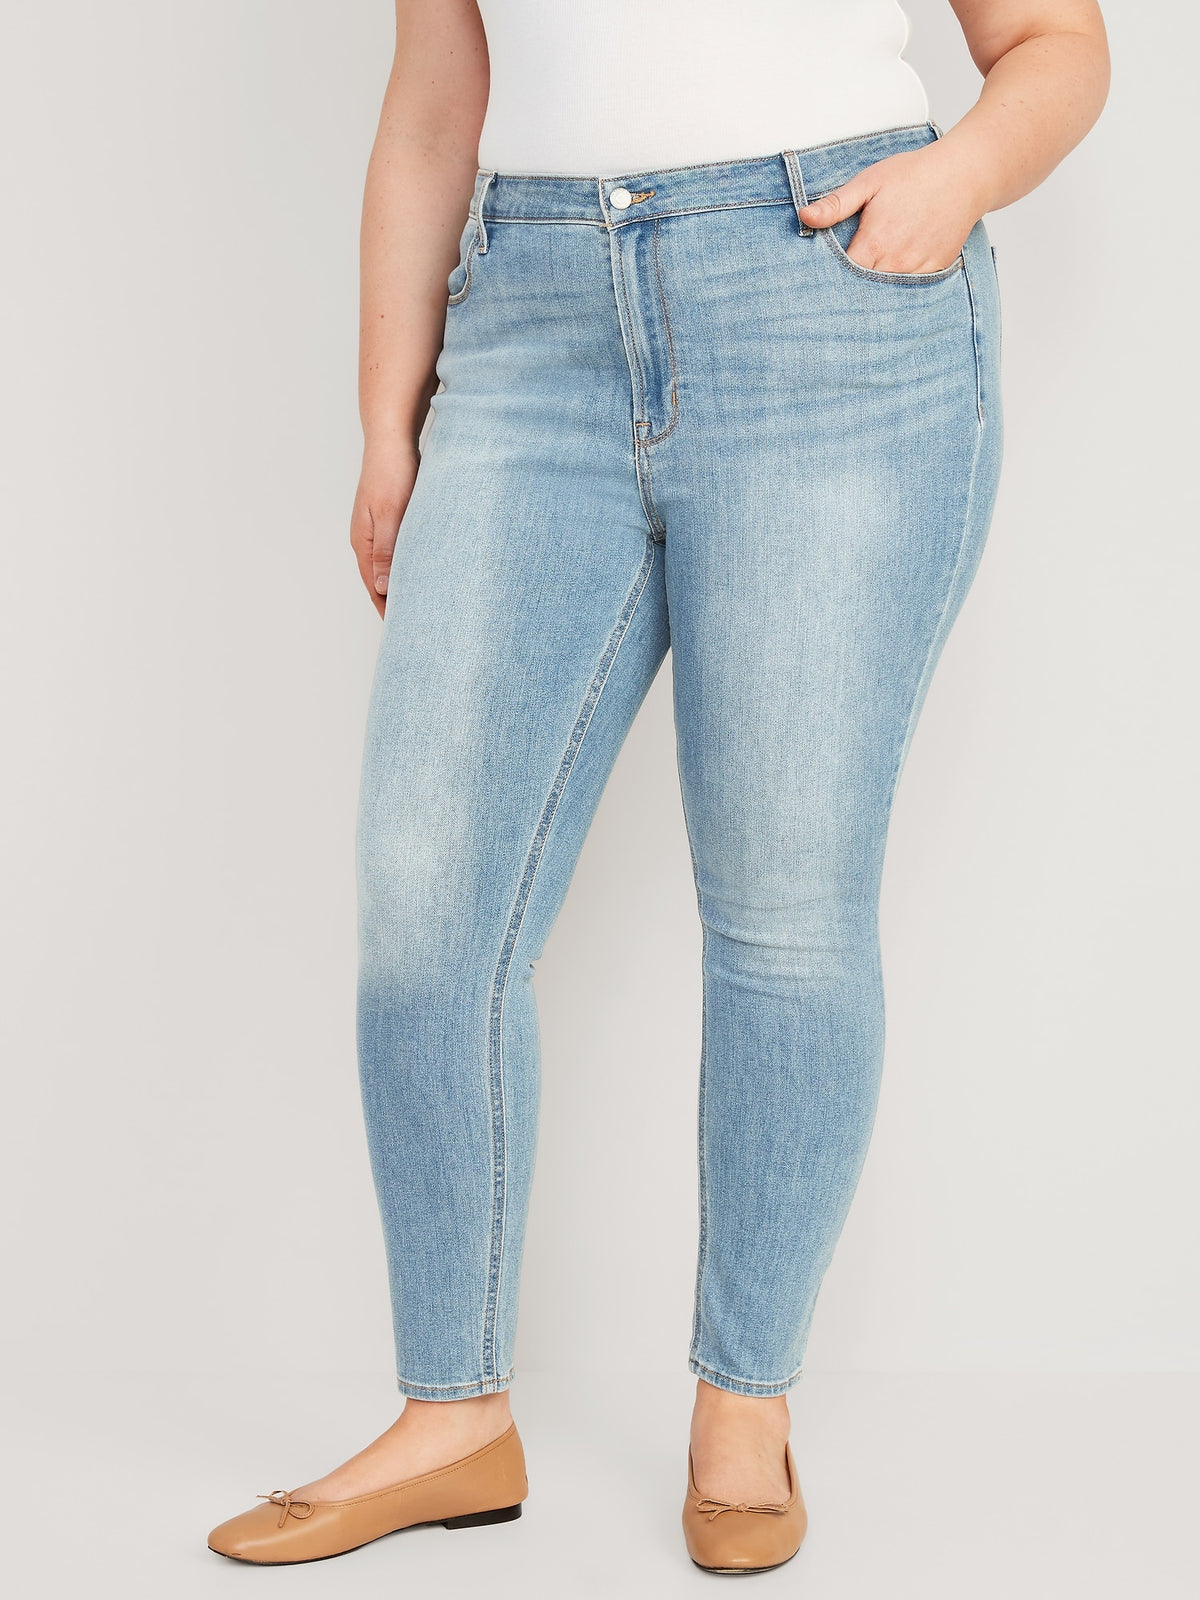 Jeans Skinny By Old Navy Size: 4